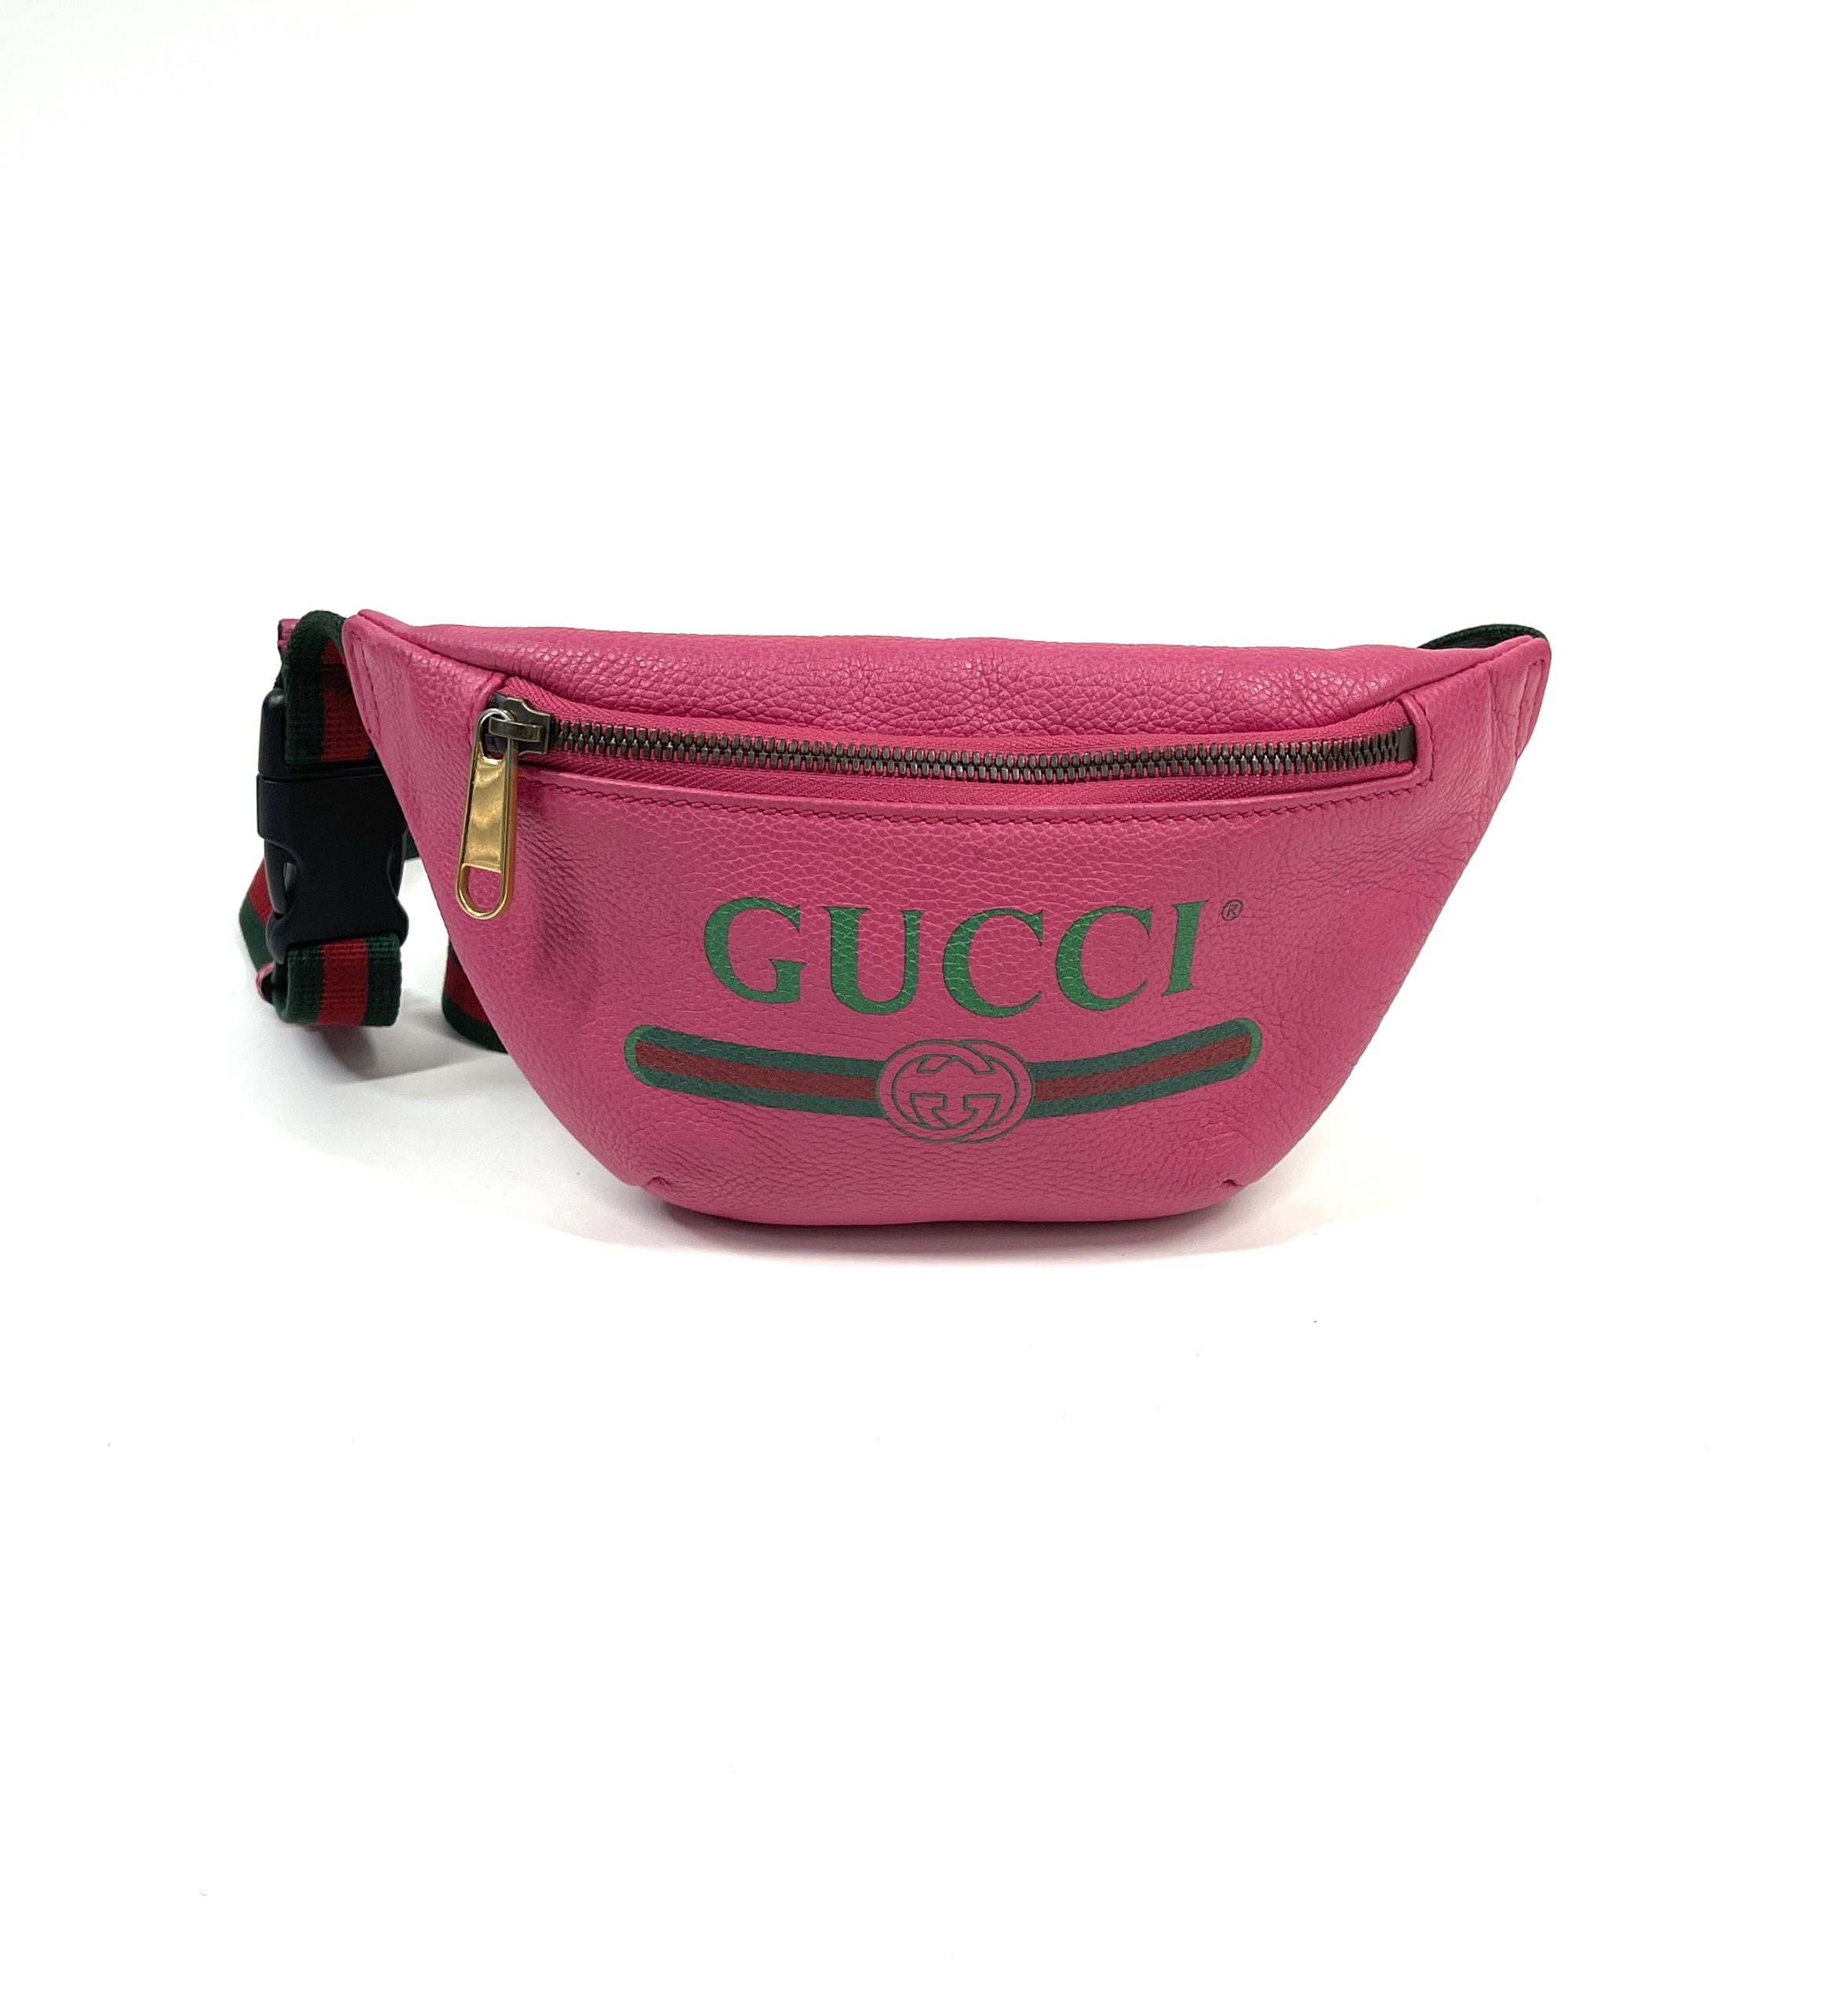 Gucci Pink Logo Leather Belt Bag Multiple colors Pony-style